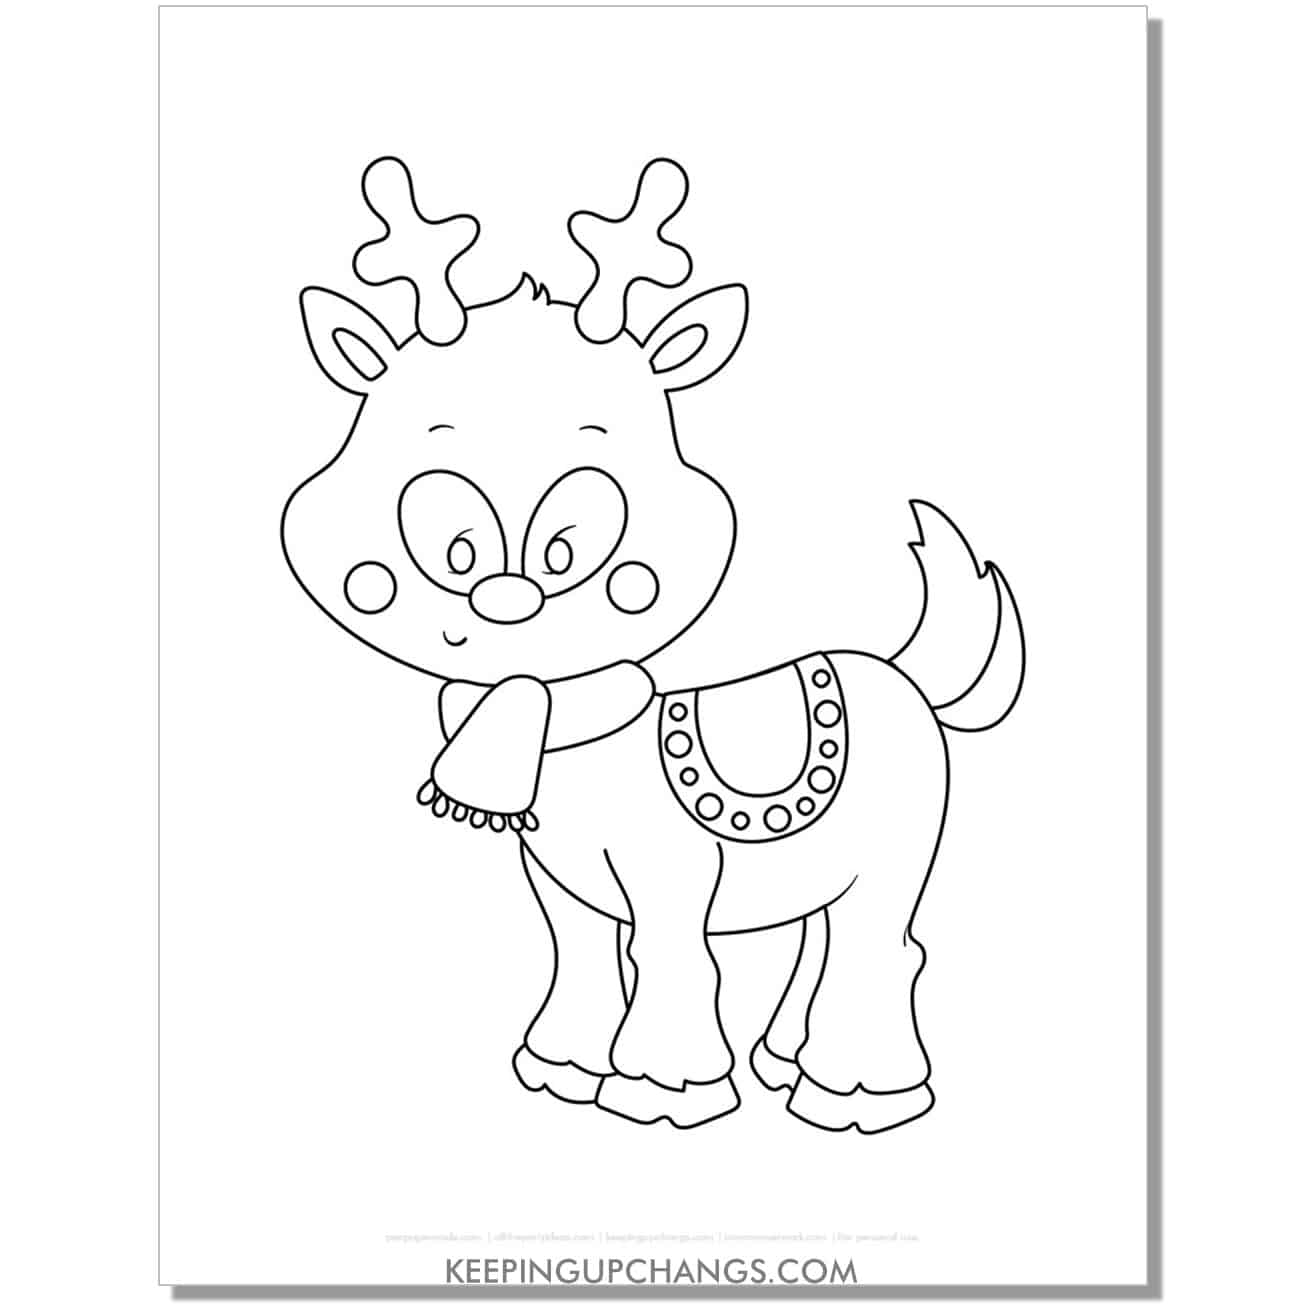 free adorable reindeer coloring page.